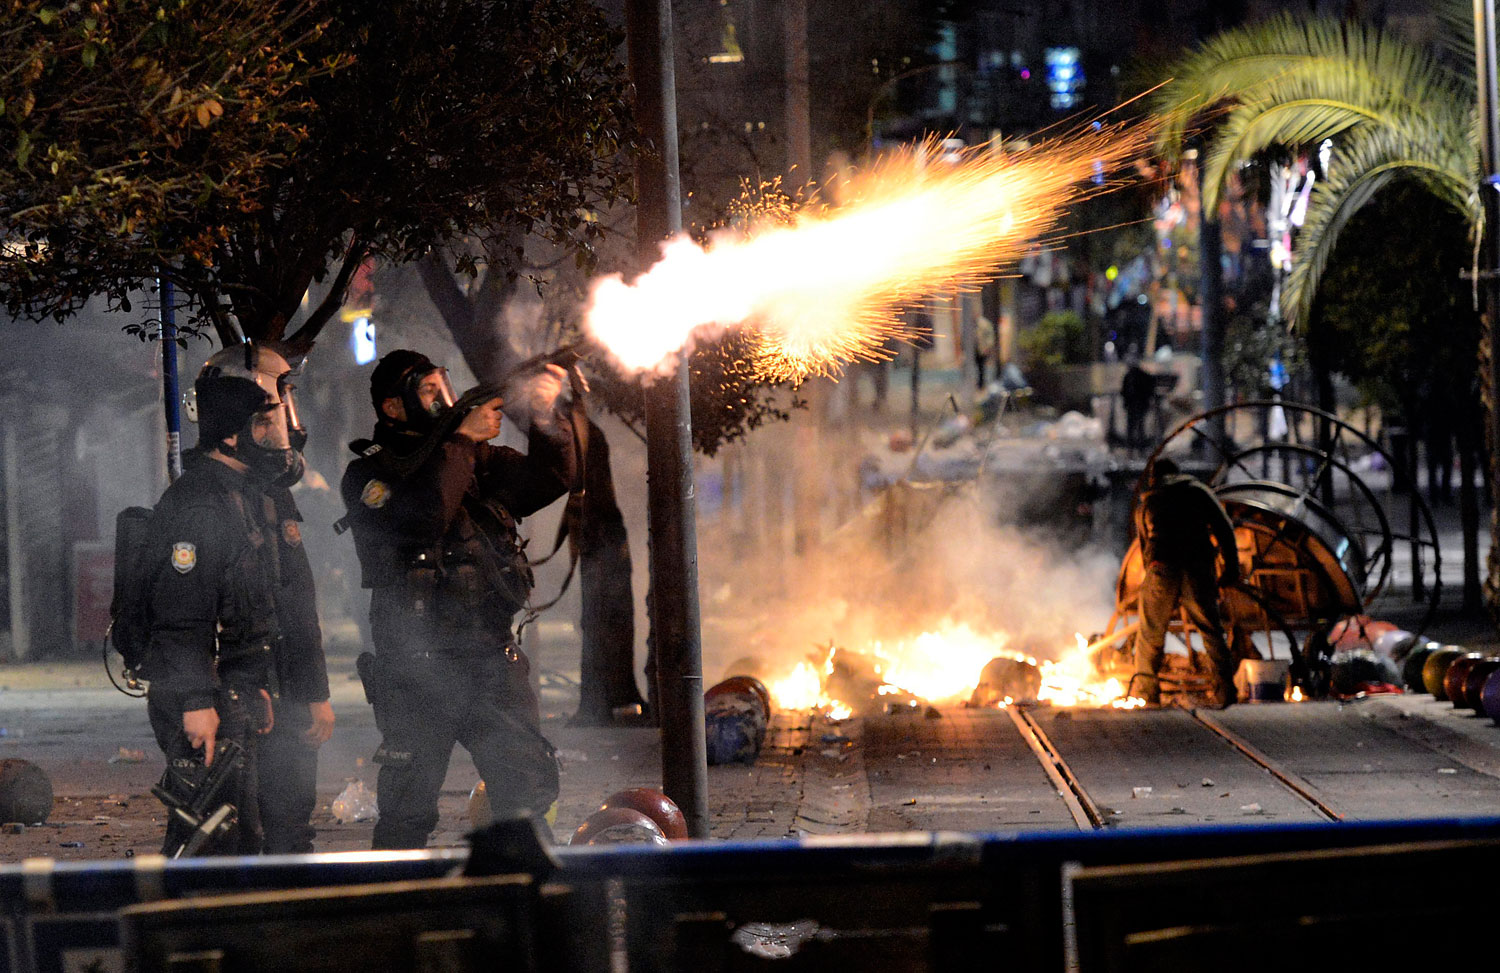 Turkish riot police fires tear gas to disperse protesters during a demonstration in Istanbul, March 11, 2014.